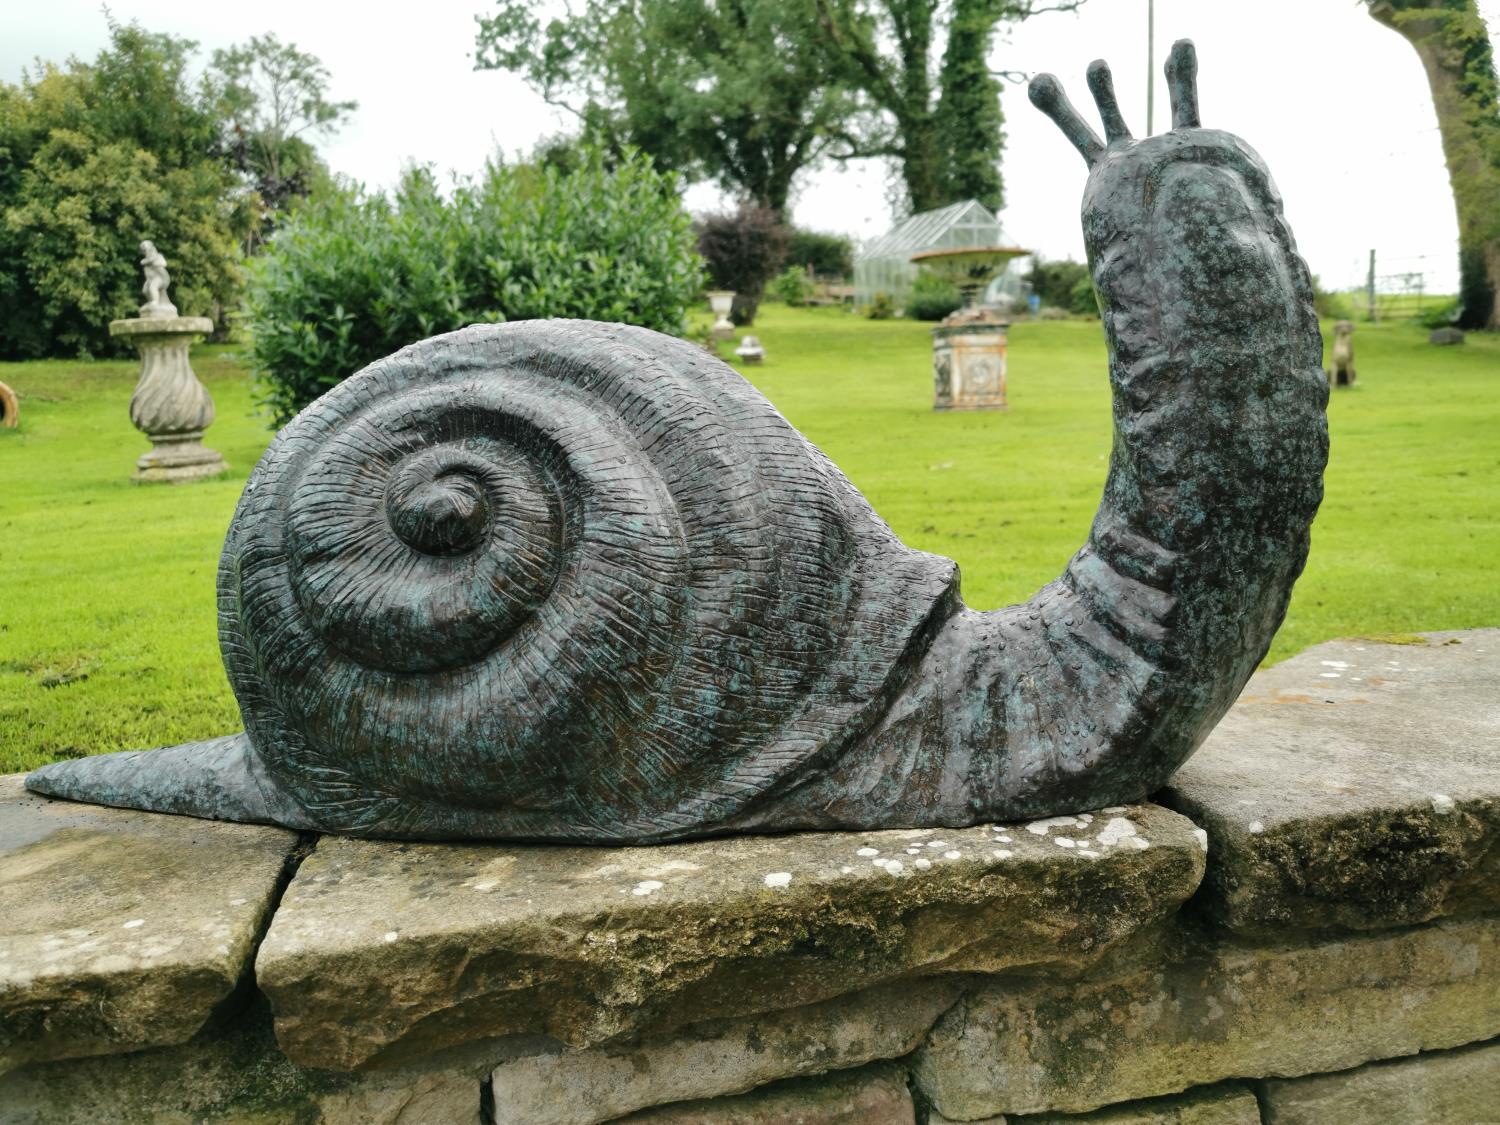 Exceptional quality bronze model of a Snail.